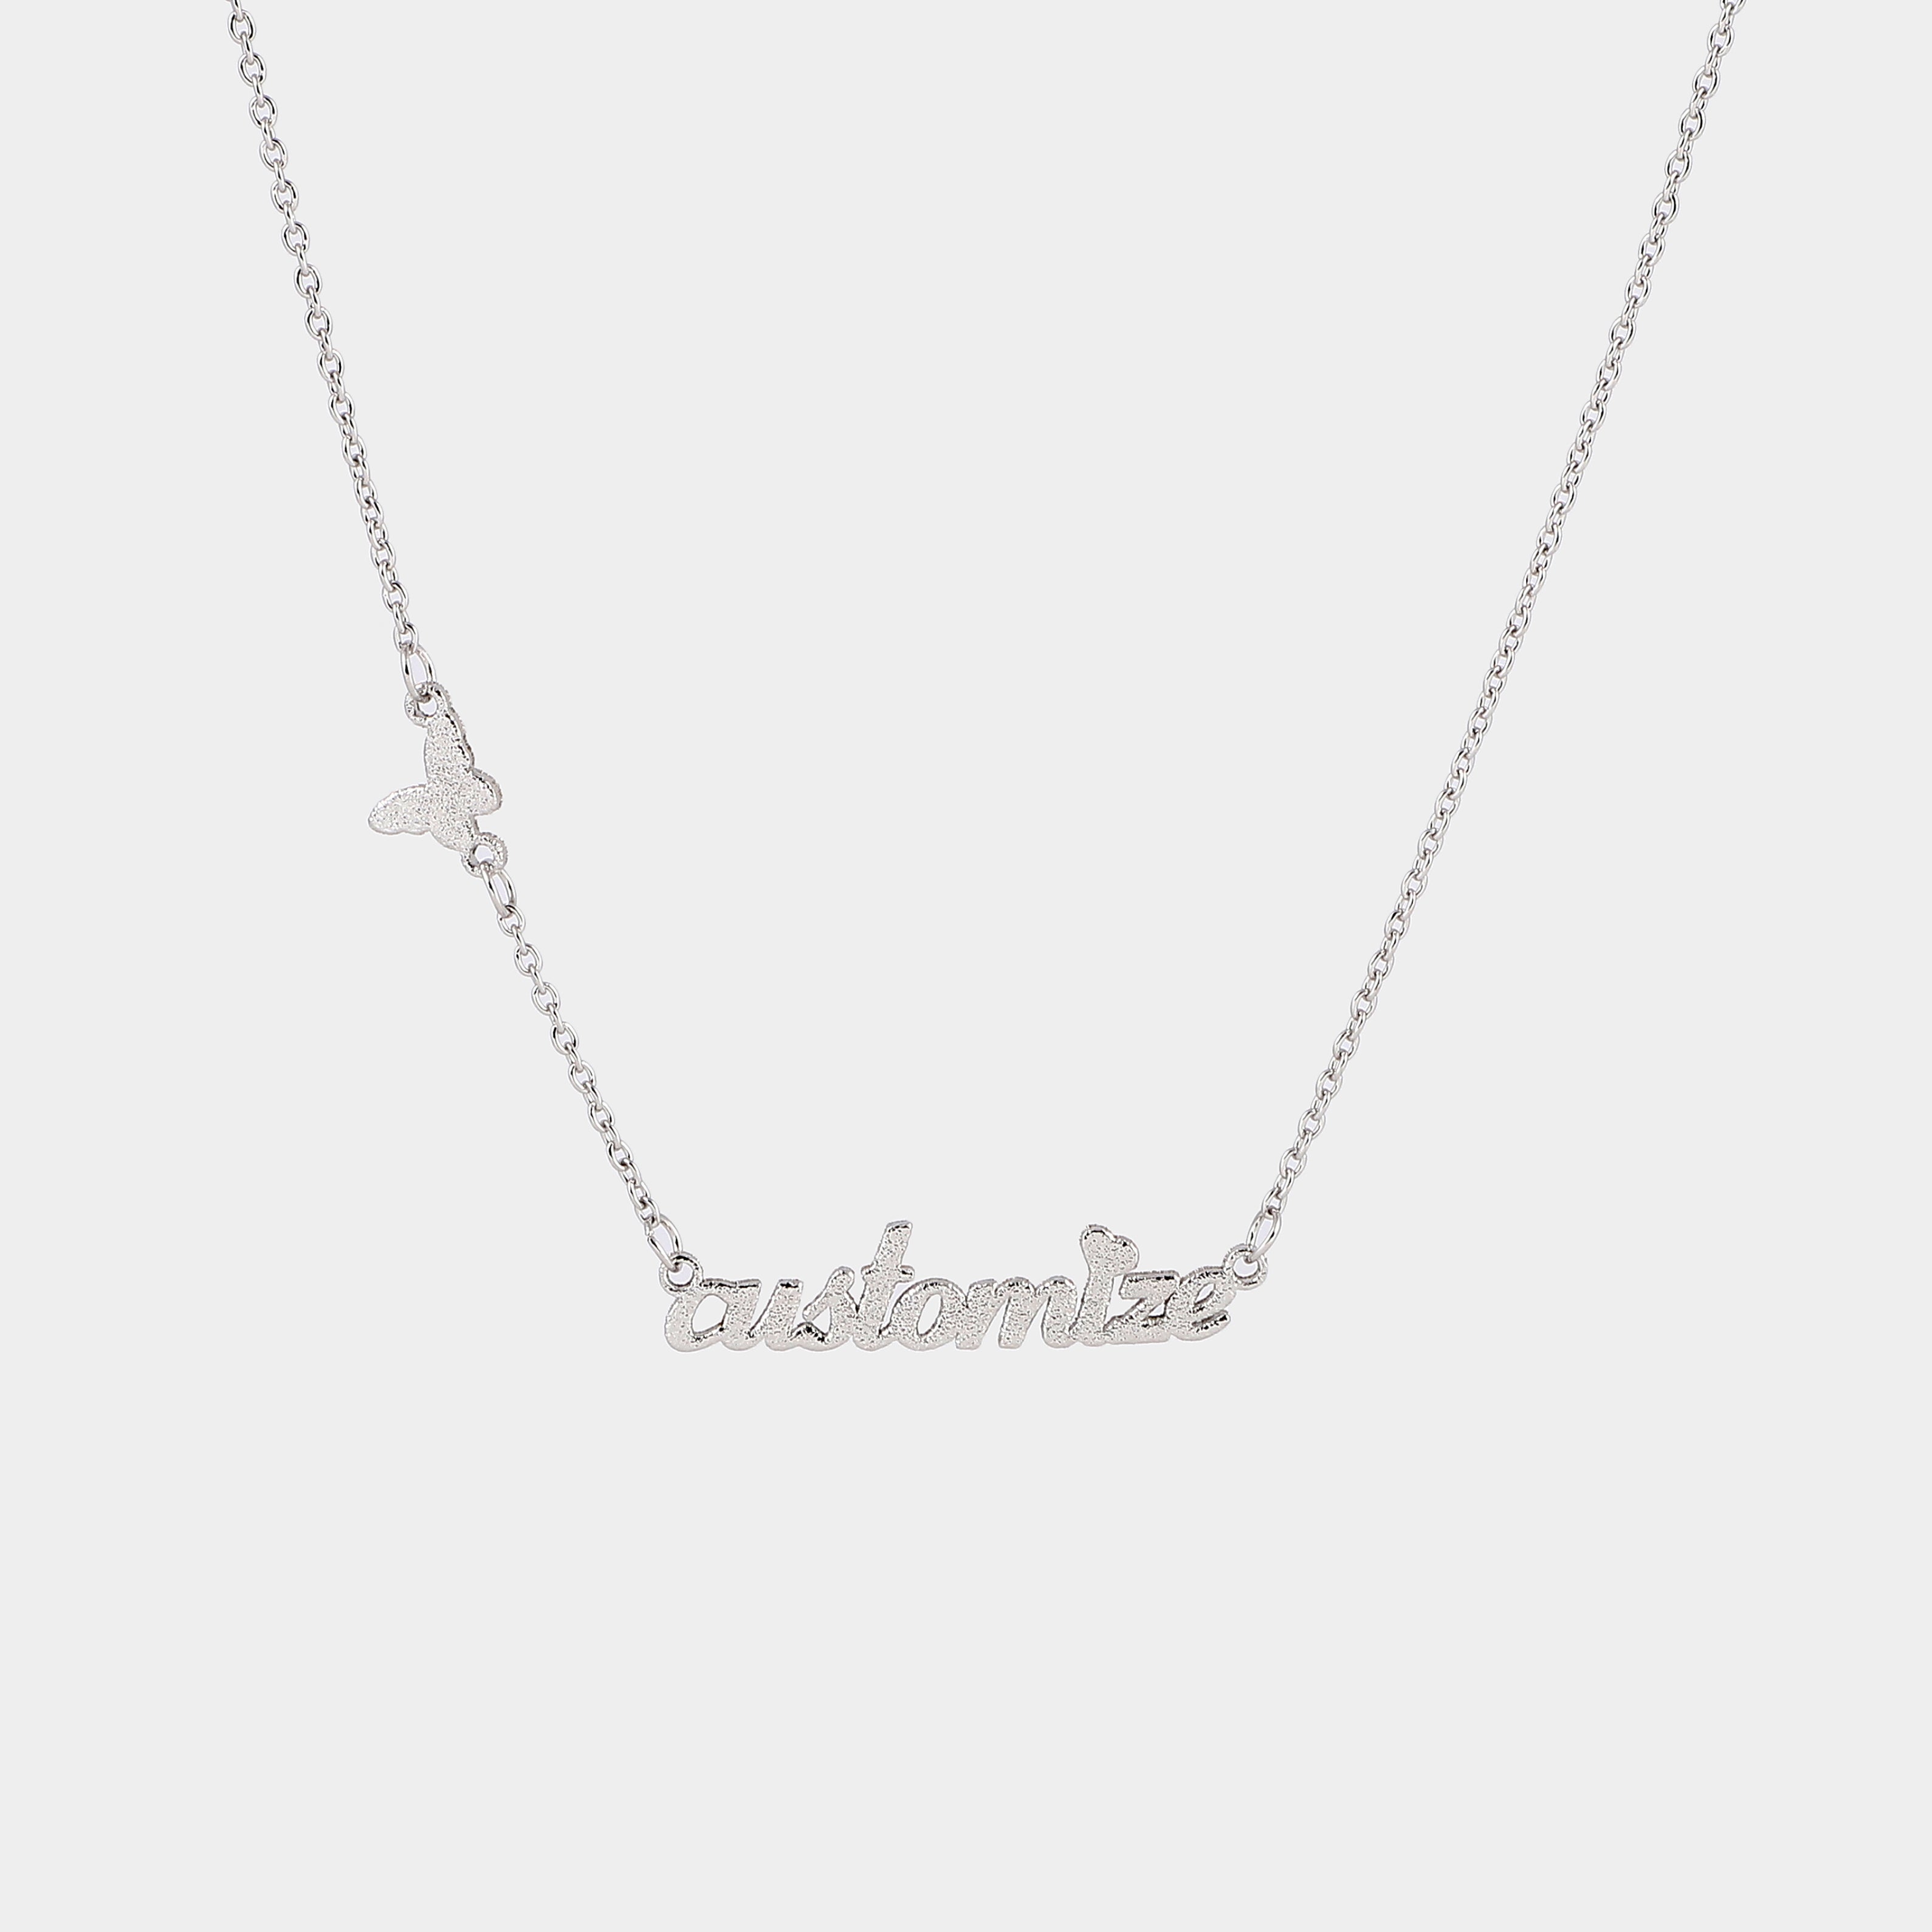 PERSONALIZED NECKLACE MINE Silver